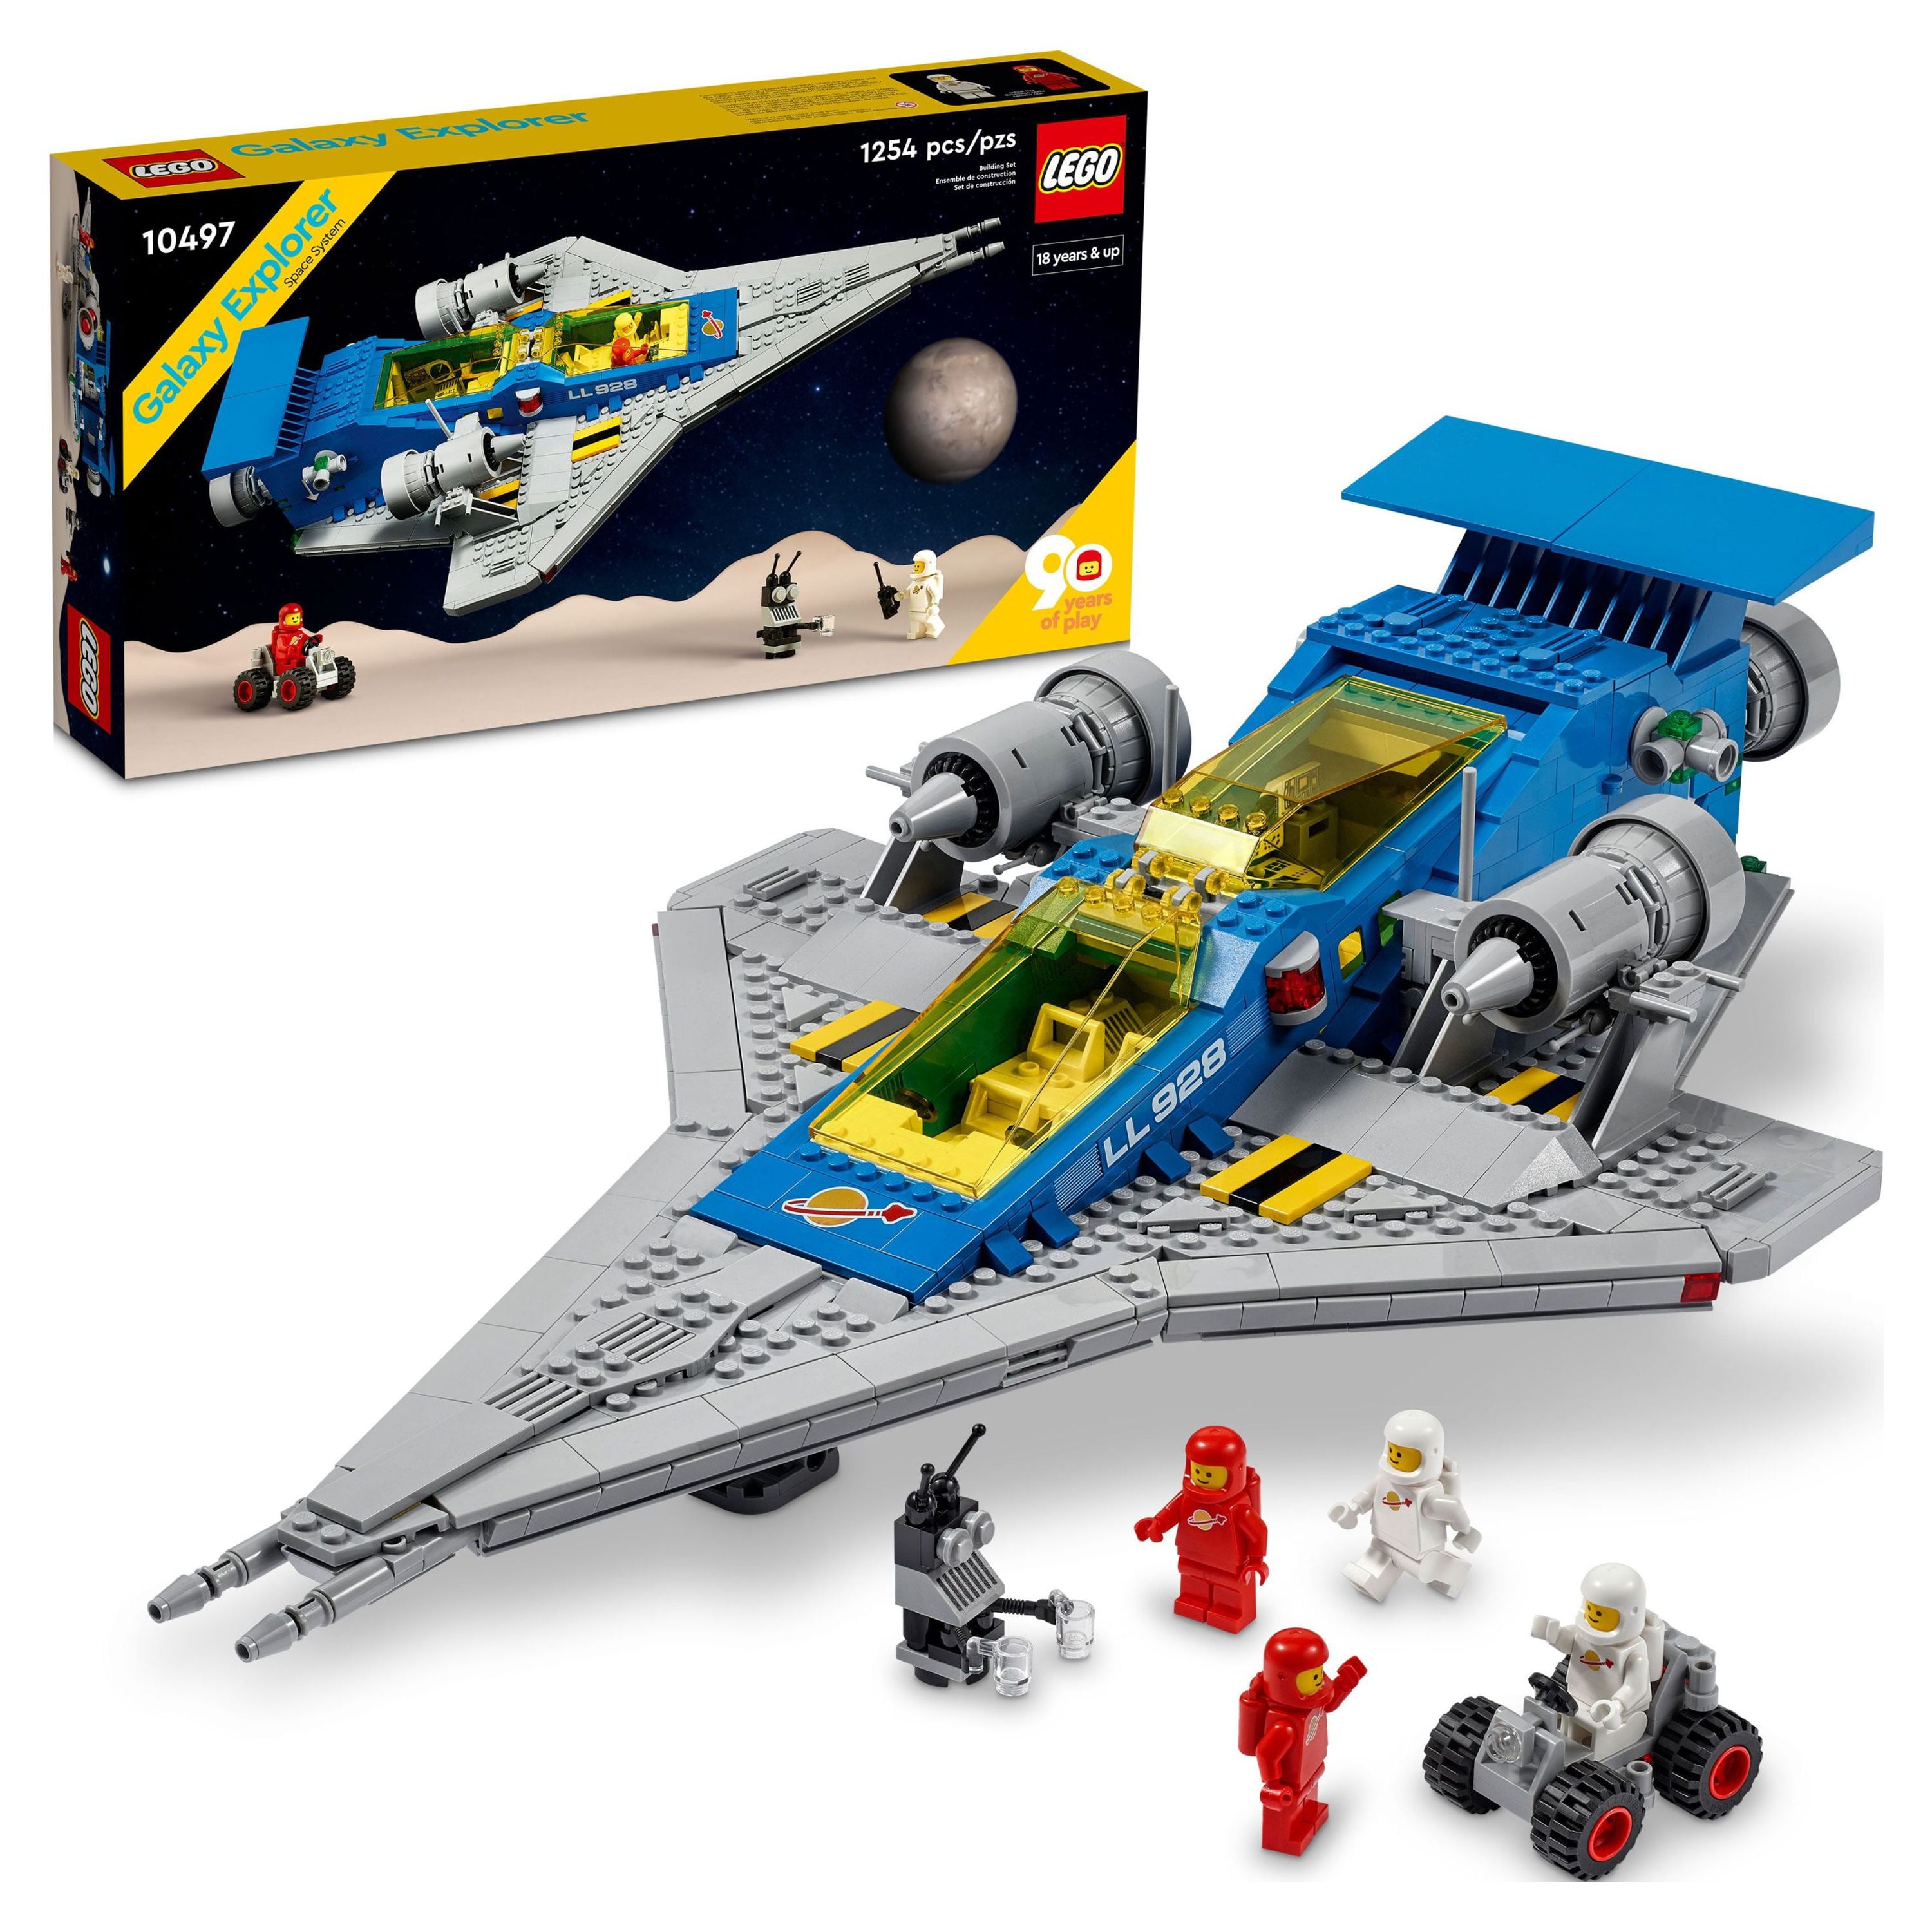 LEGO Icons Galaxy Explorer 10497 90th Anniversary Collectible Edition Model Spaceship, Space Building Set with Astronaut Figures, Gift Idea - image 1 of 8